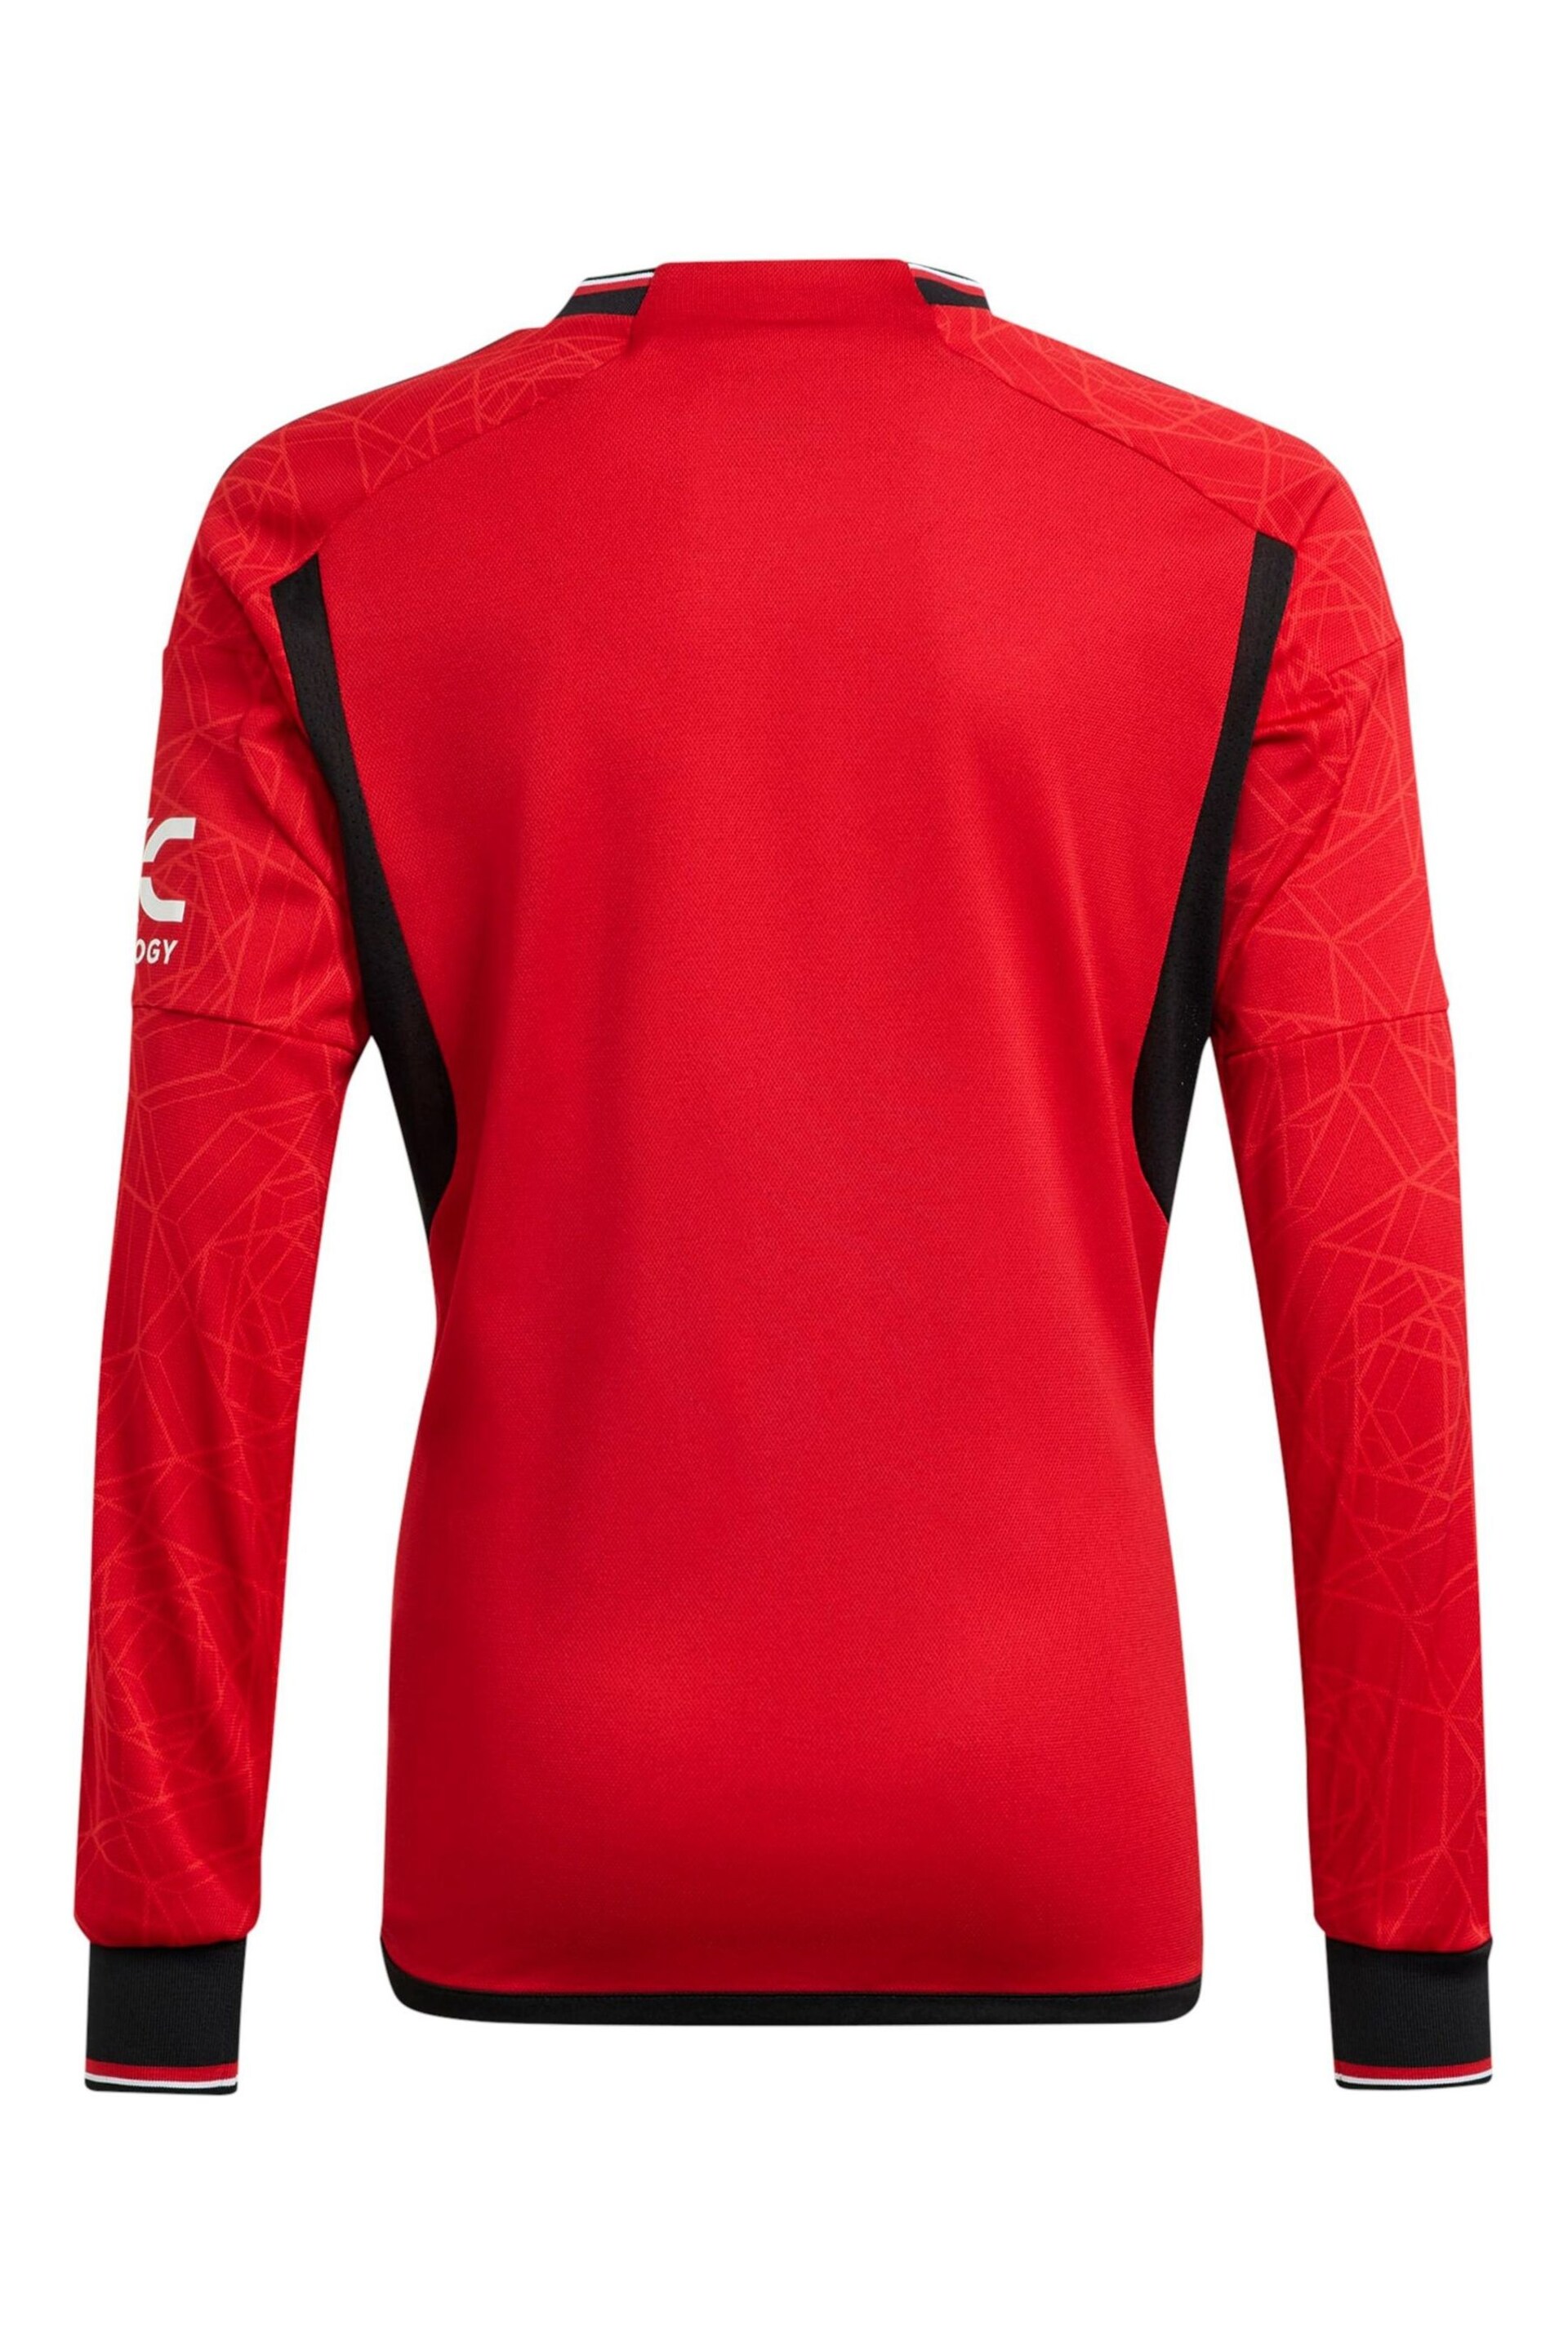 adidas Red Long Sleeve Manchester United Home Shirt 2023-24 - Image 3 of 3